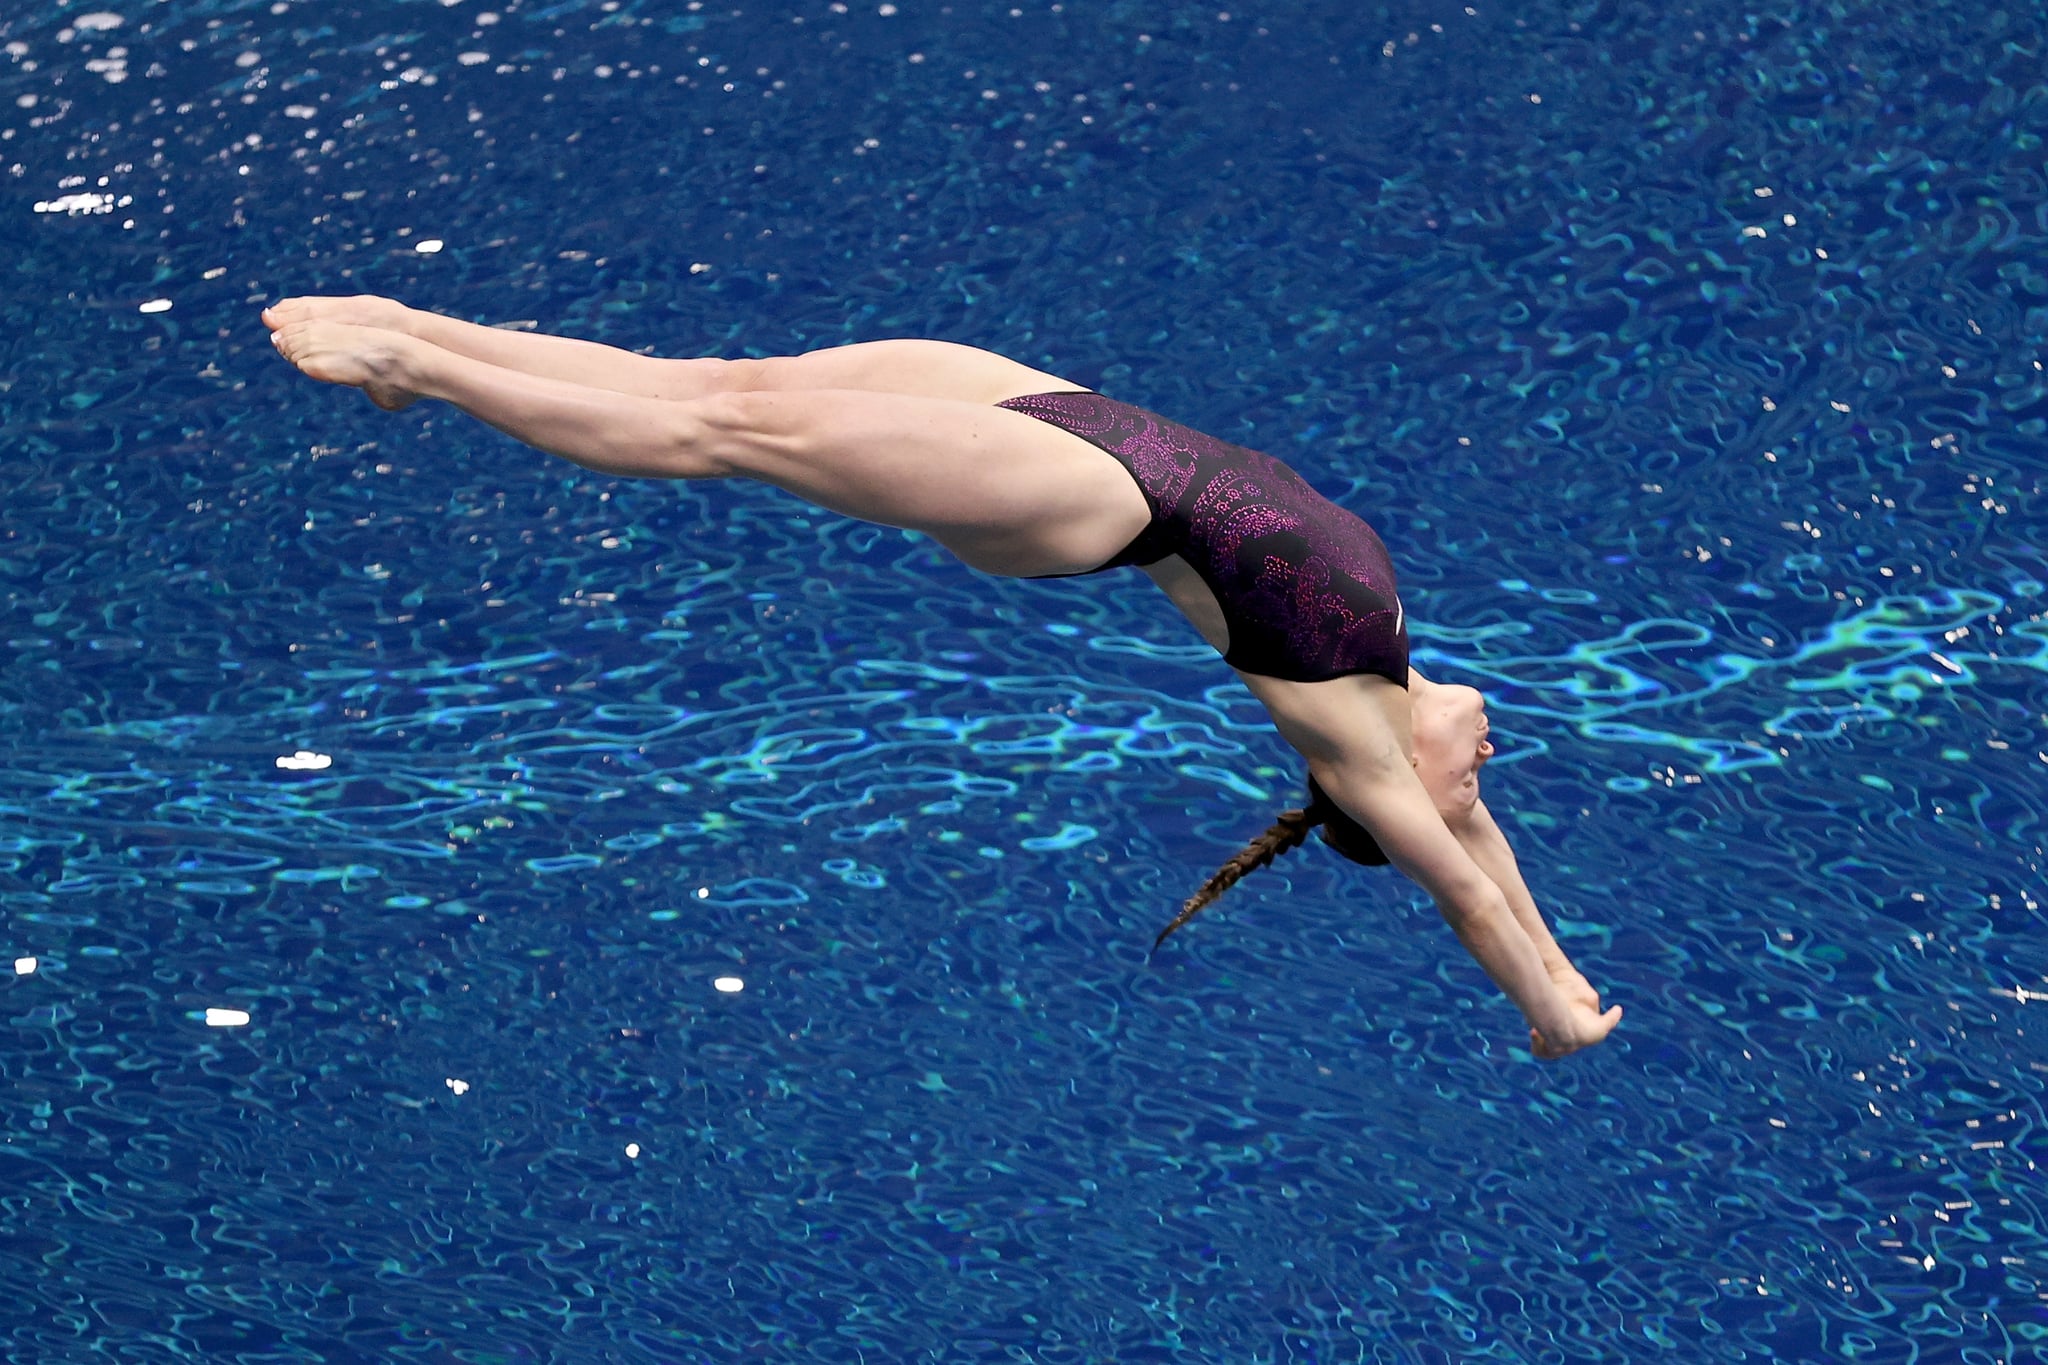 Krysta Palmer At The 2021 Us Olympic Diving Trials Diver Krysta Palmer Will Make History At Her Olympic Debut This Summer Popsugar Fitness Photo 8